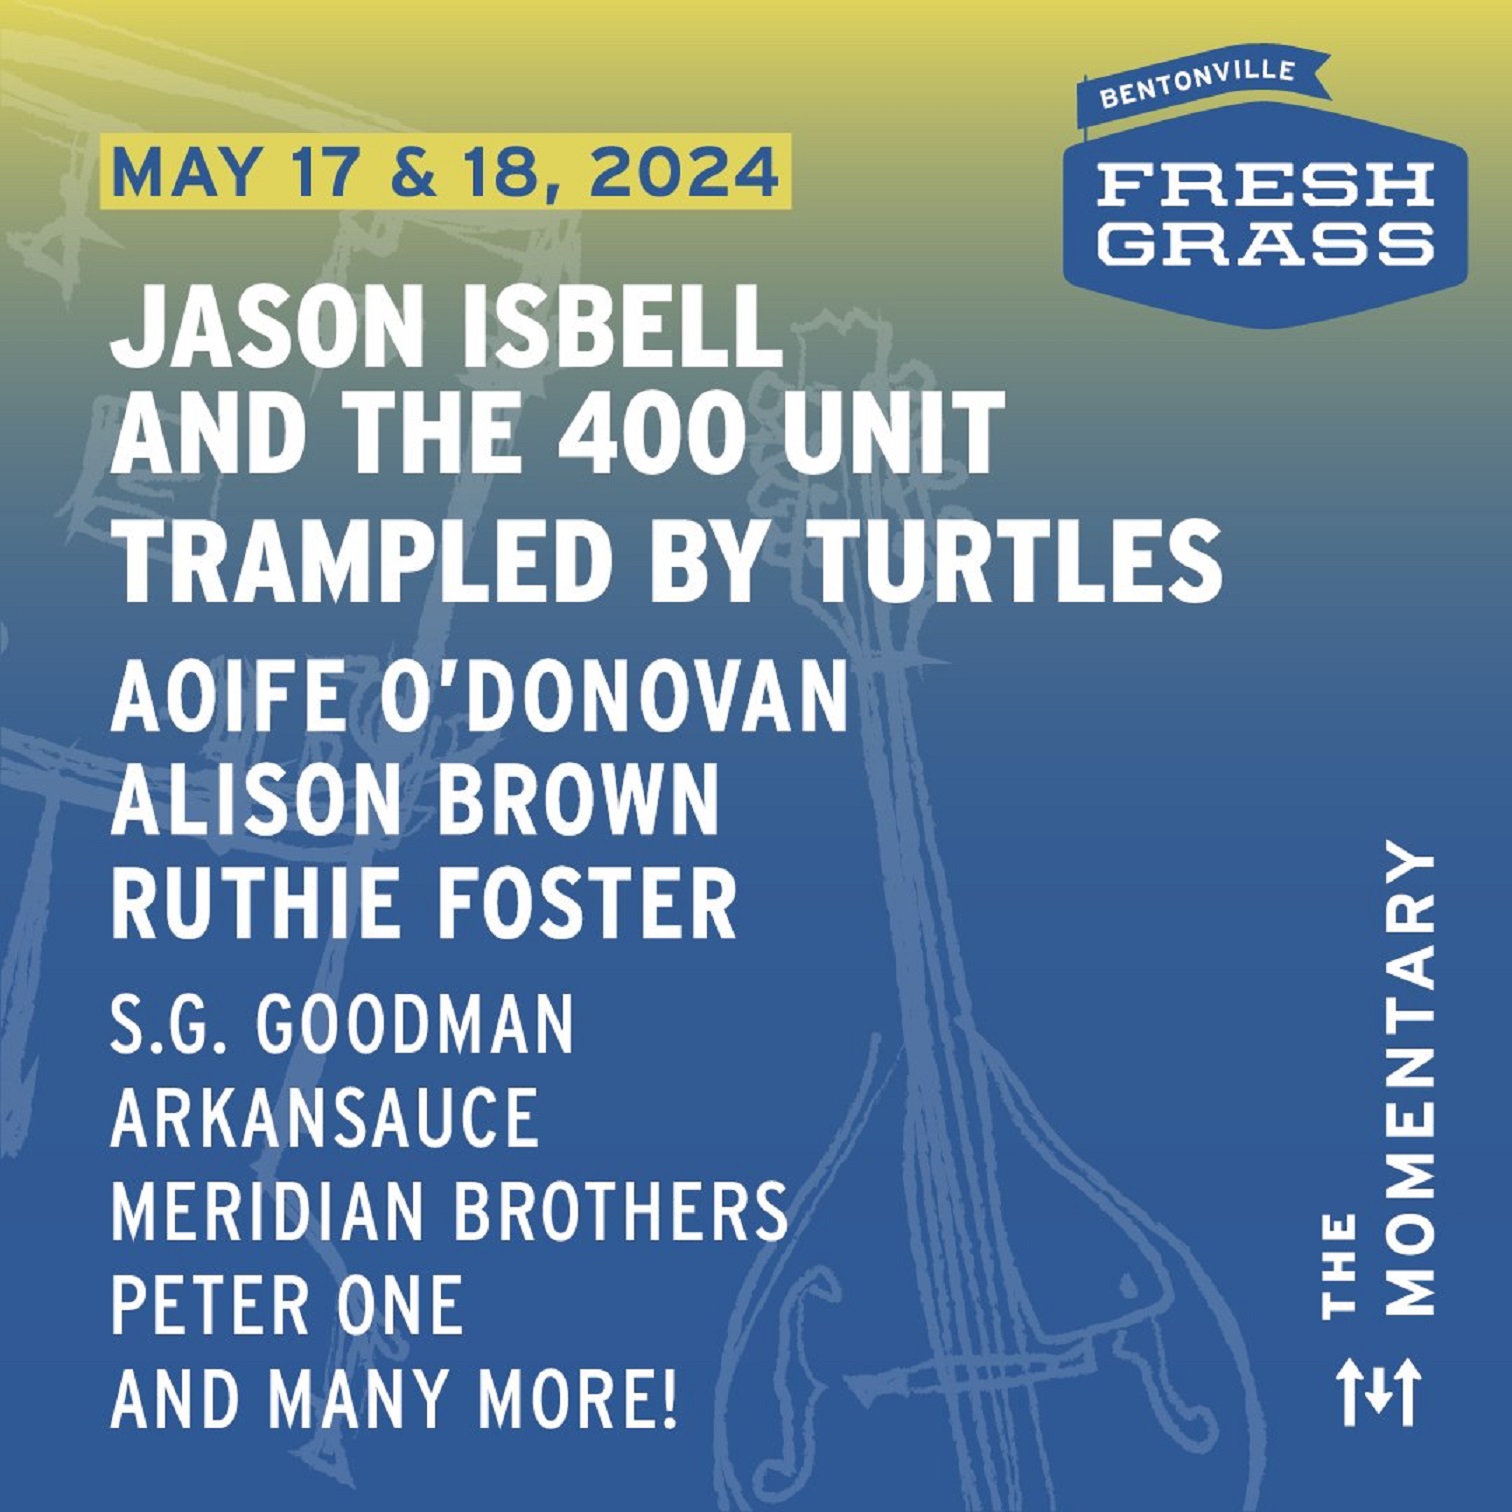 FreshGrass | Bentonville Celebrates Music and History in the Heart of the Ozarks This Summer